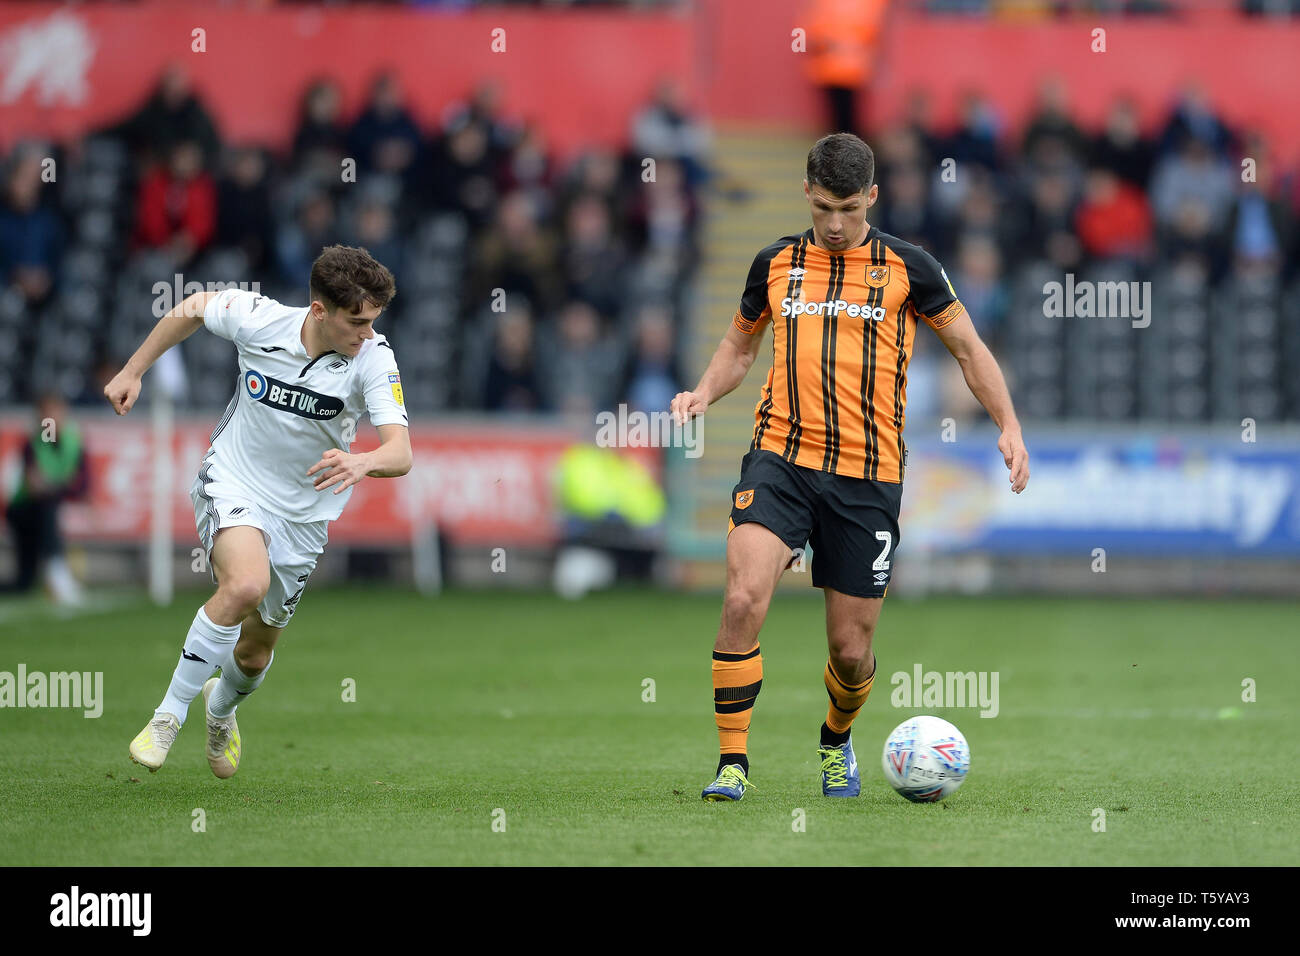 SWANSEA, WALES 27th April Daniel James of Swansea City about to challenge  Eric Lichaj of Hull City during the Sky Bet Championship match between  Swansea City and Hull City at the Liberty